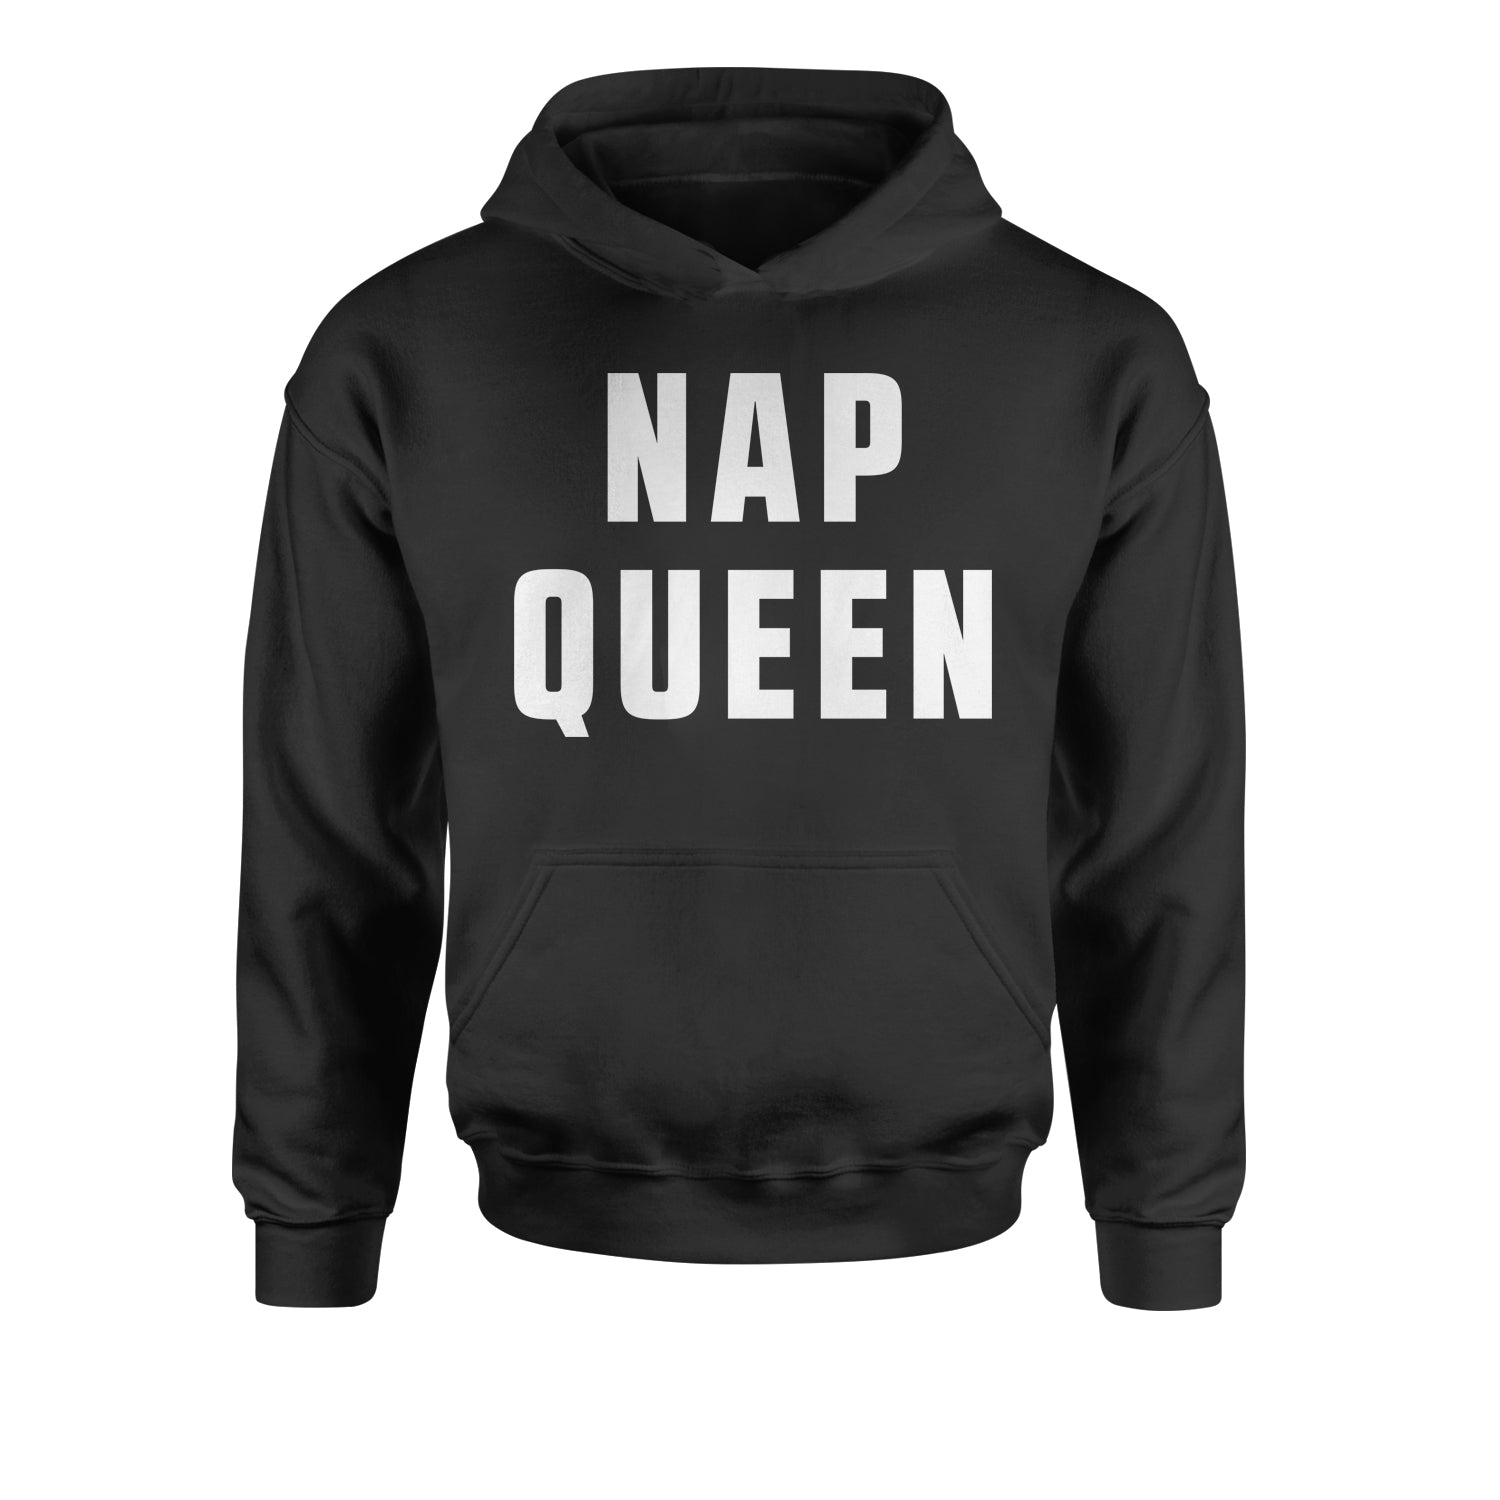 Nap Queen (White Print) Comfy Top For Lazy Days Youth-Sized Hoodie all, day, function, lazy, nap, pajamas, queen, siesta, sleep, tired, to, too by Expression Tees